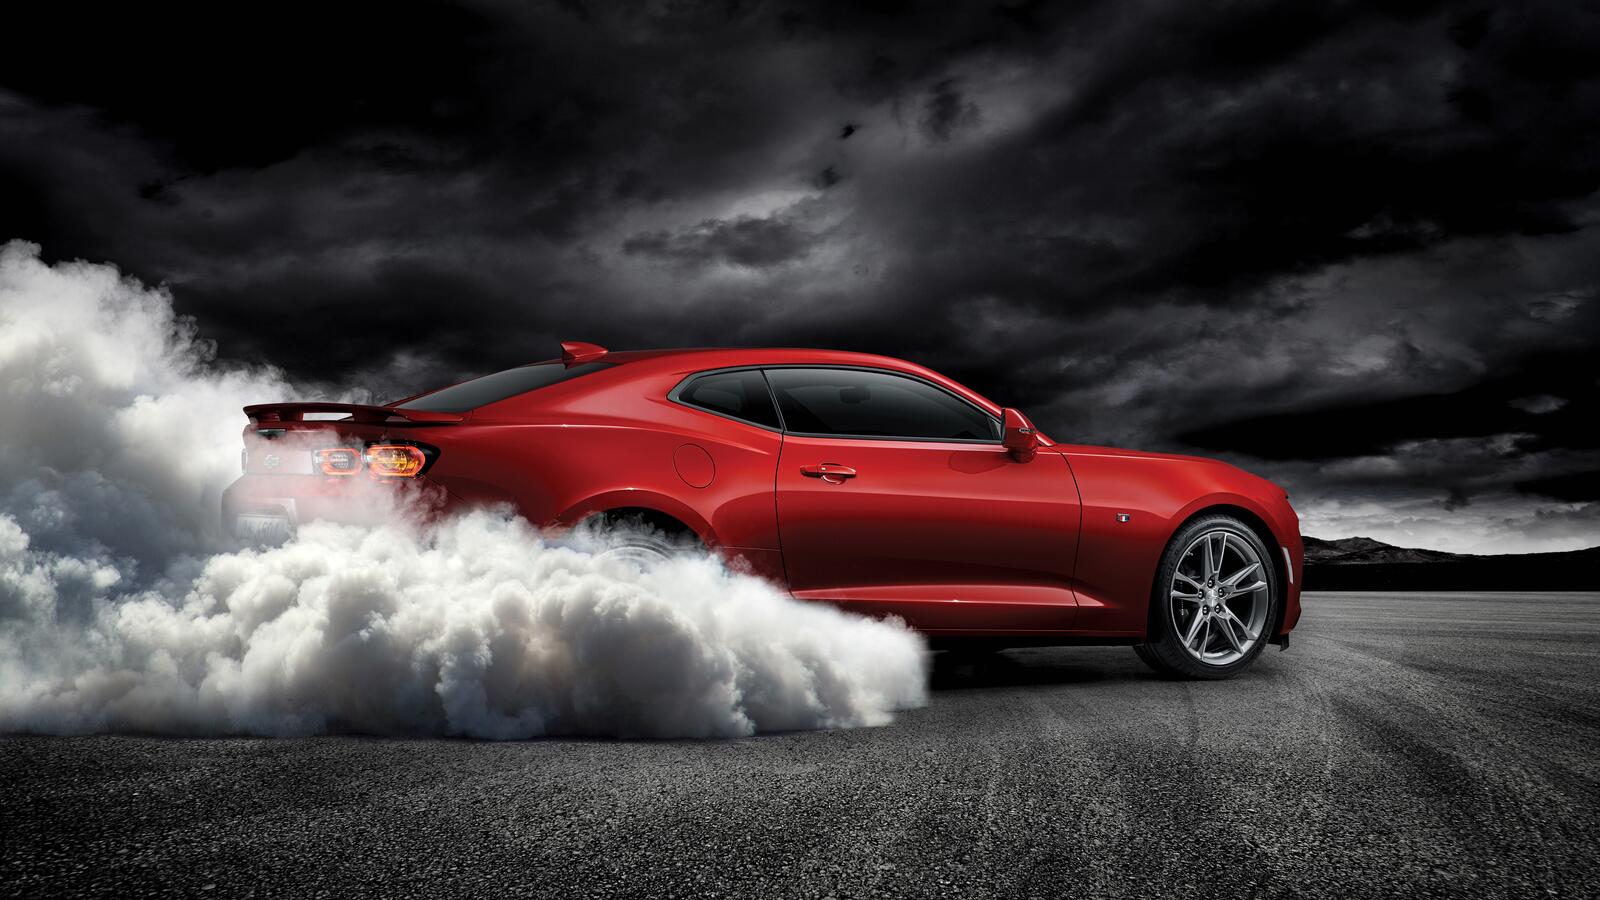 Free photo Drifting in place on a red chevrolet camaro ss.